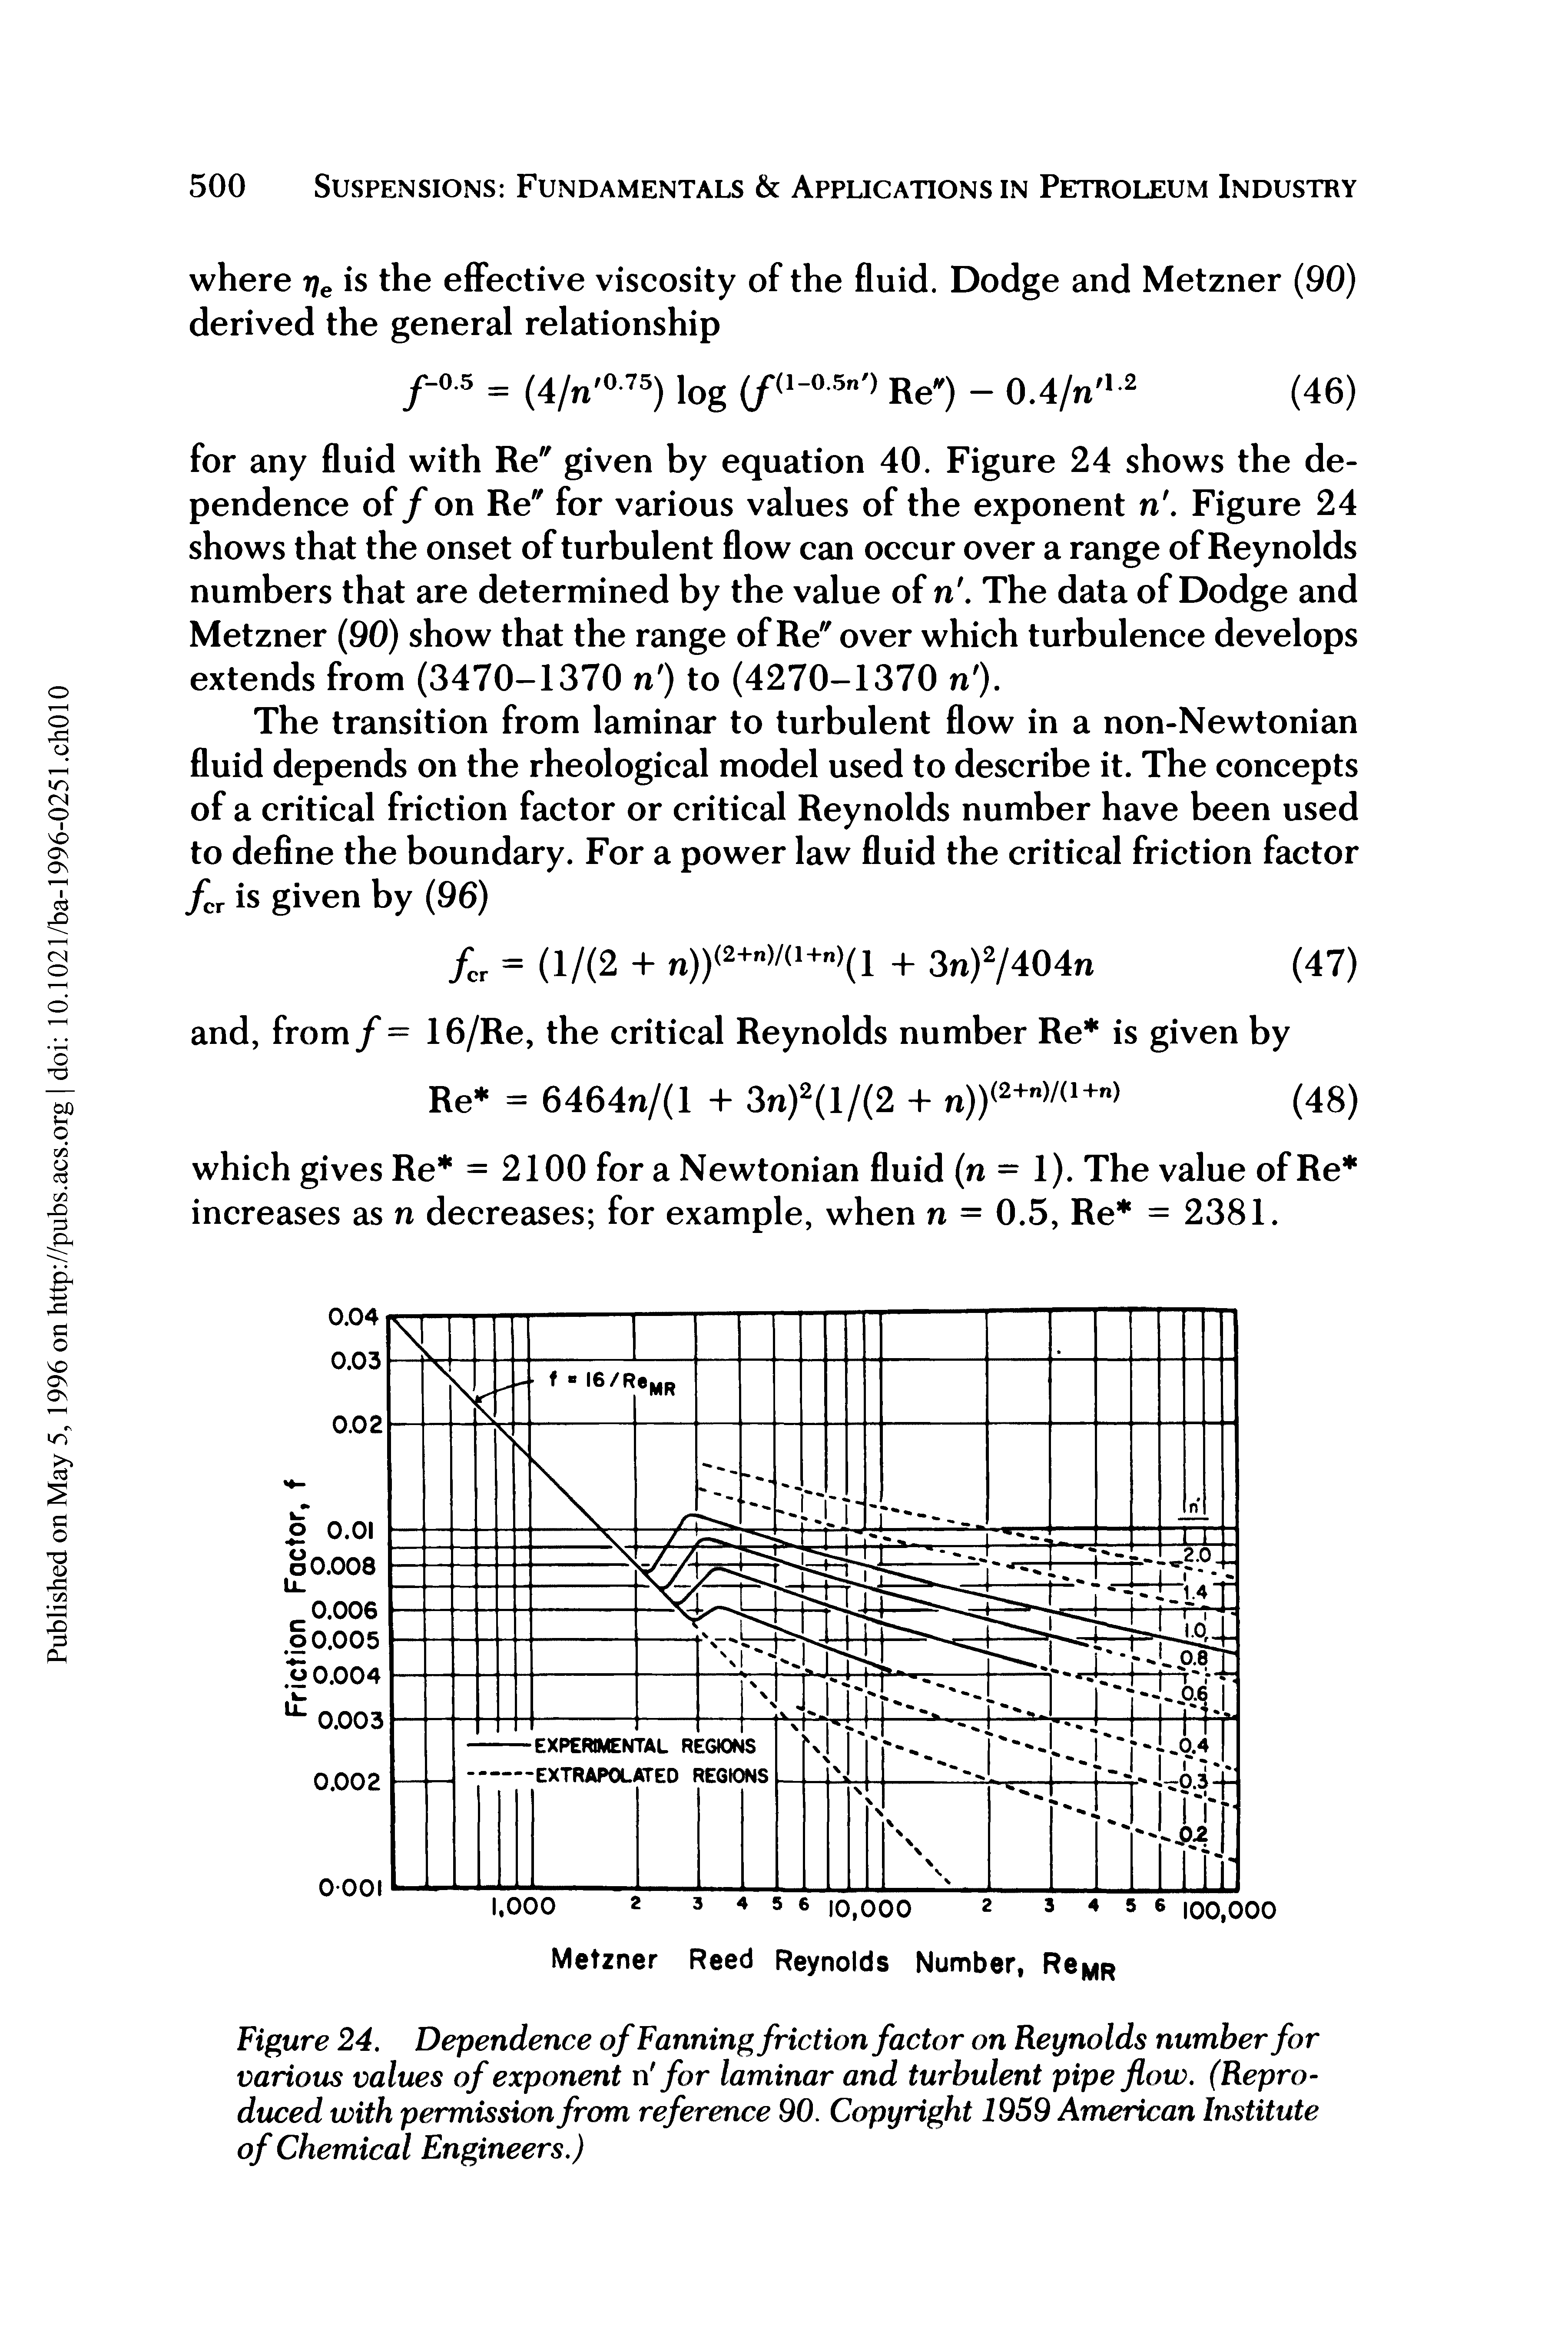 Figure 24. Dependence of Fanning friction factor on Reynolds number for various values of exponent n for laminar and turbulent pipe flow. (Reproduced with permission from reference 90. Copyright 1959 American Institute of Chemical Engineers.)...